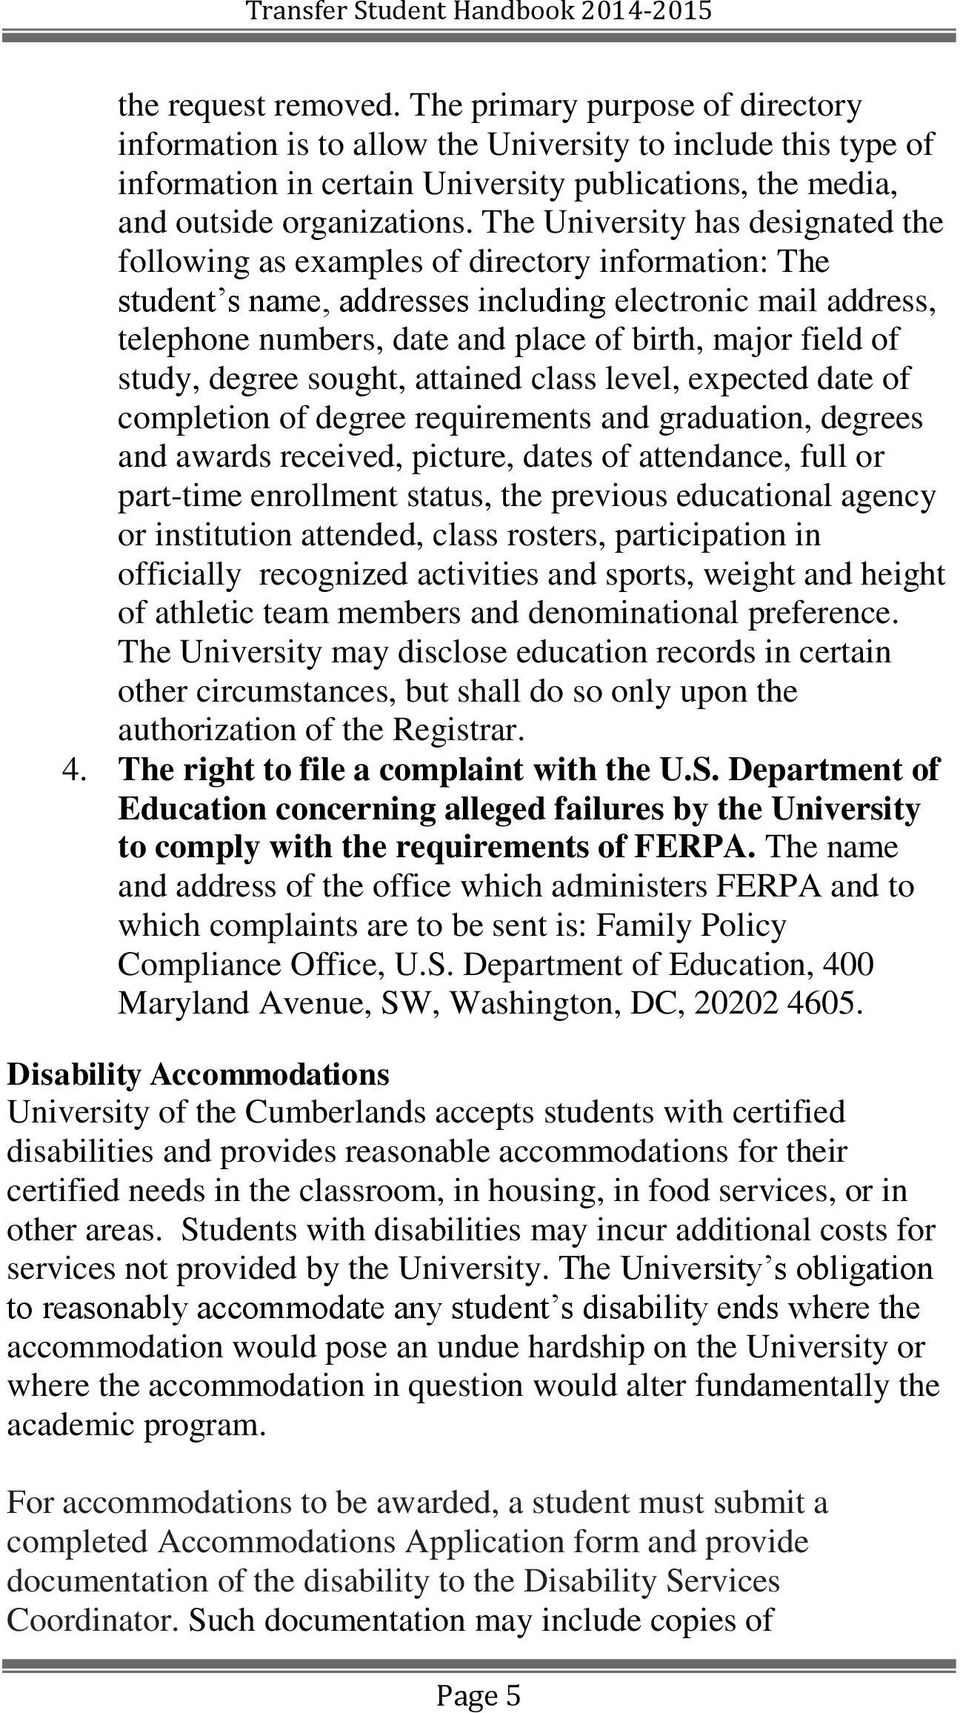 The University has designated the following as examples of directory information: The student s name, addresses including electronic mail address, telephone numbers, date and place of birth, major